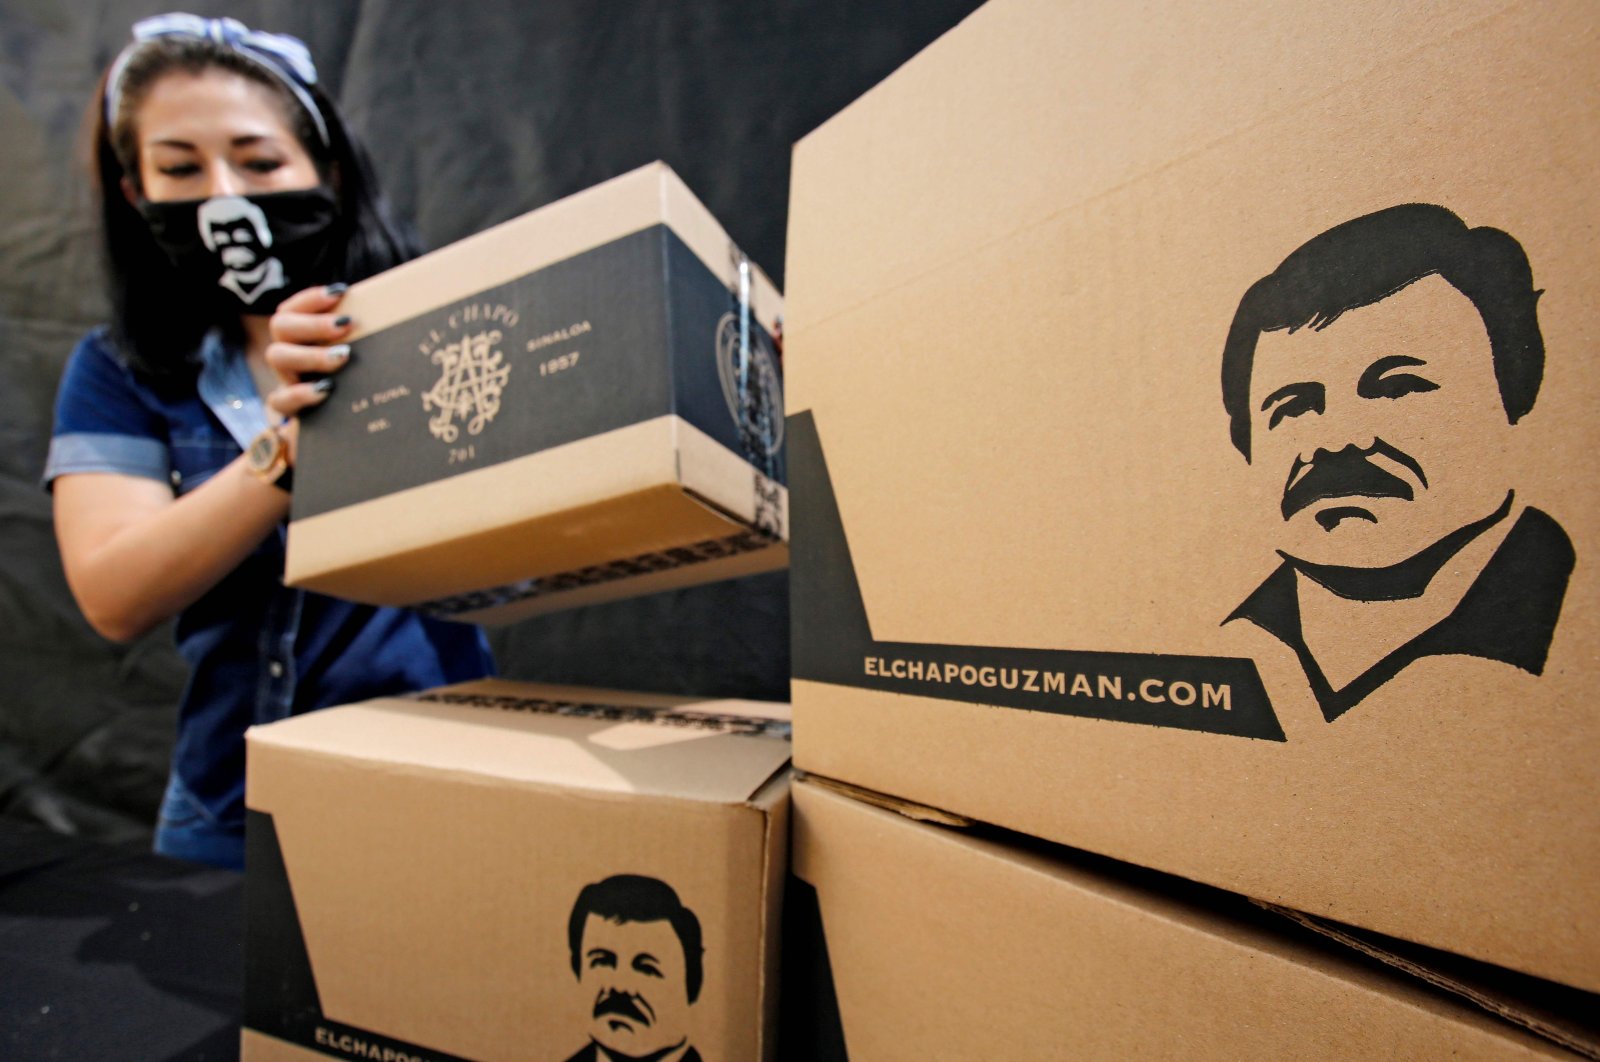 An employee of the Alejandrina Guzman Foundation wears a face mask with the image of Mexican drug lord Joaquin "El Chapo" Guzman -Alejandrina's father- as she arranges boxes with basic goods to be donated to people in need amid the new coronavirus pandemic in Guadalajara, Mexico, on April 17, 2020. (AFP Photo)